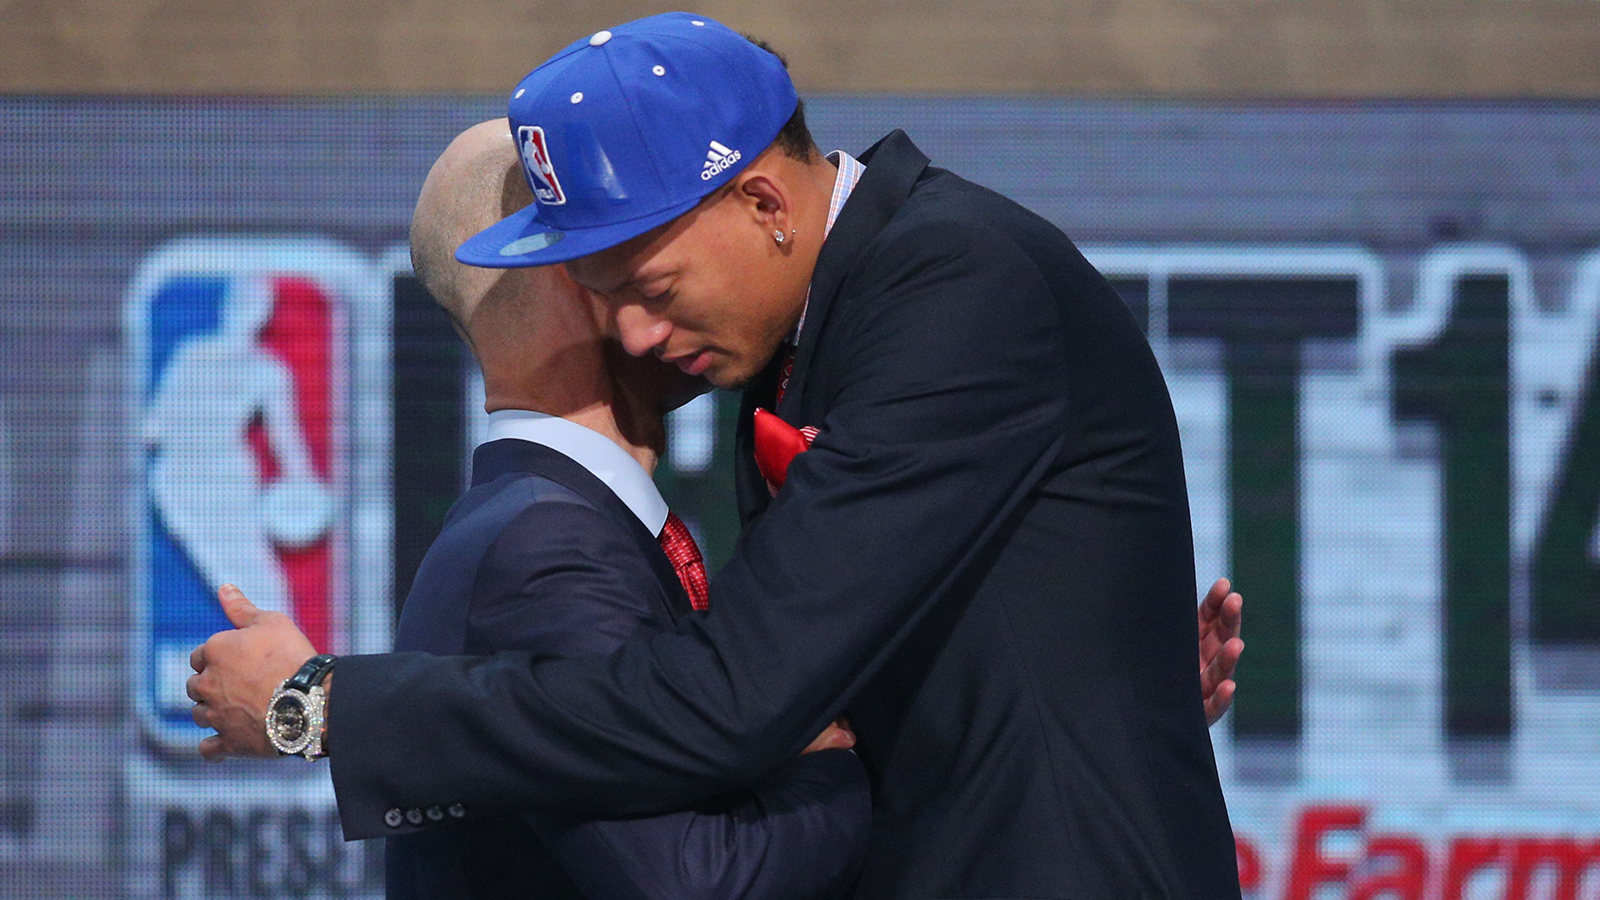 Jun 26, 2014; Brooklyn, NY, USA; Isaiah Austin (Baylor) hugs NBA commissioner Adam Silver after being selected as an honorary draft pick by the NBA during the 2014 NBA Draft at the Barclays Center. Austin was diagnosed with Marfan Syndrome ending his career. Mandatory Credit: Brad Penner-USA TODAY Sports